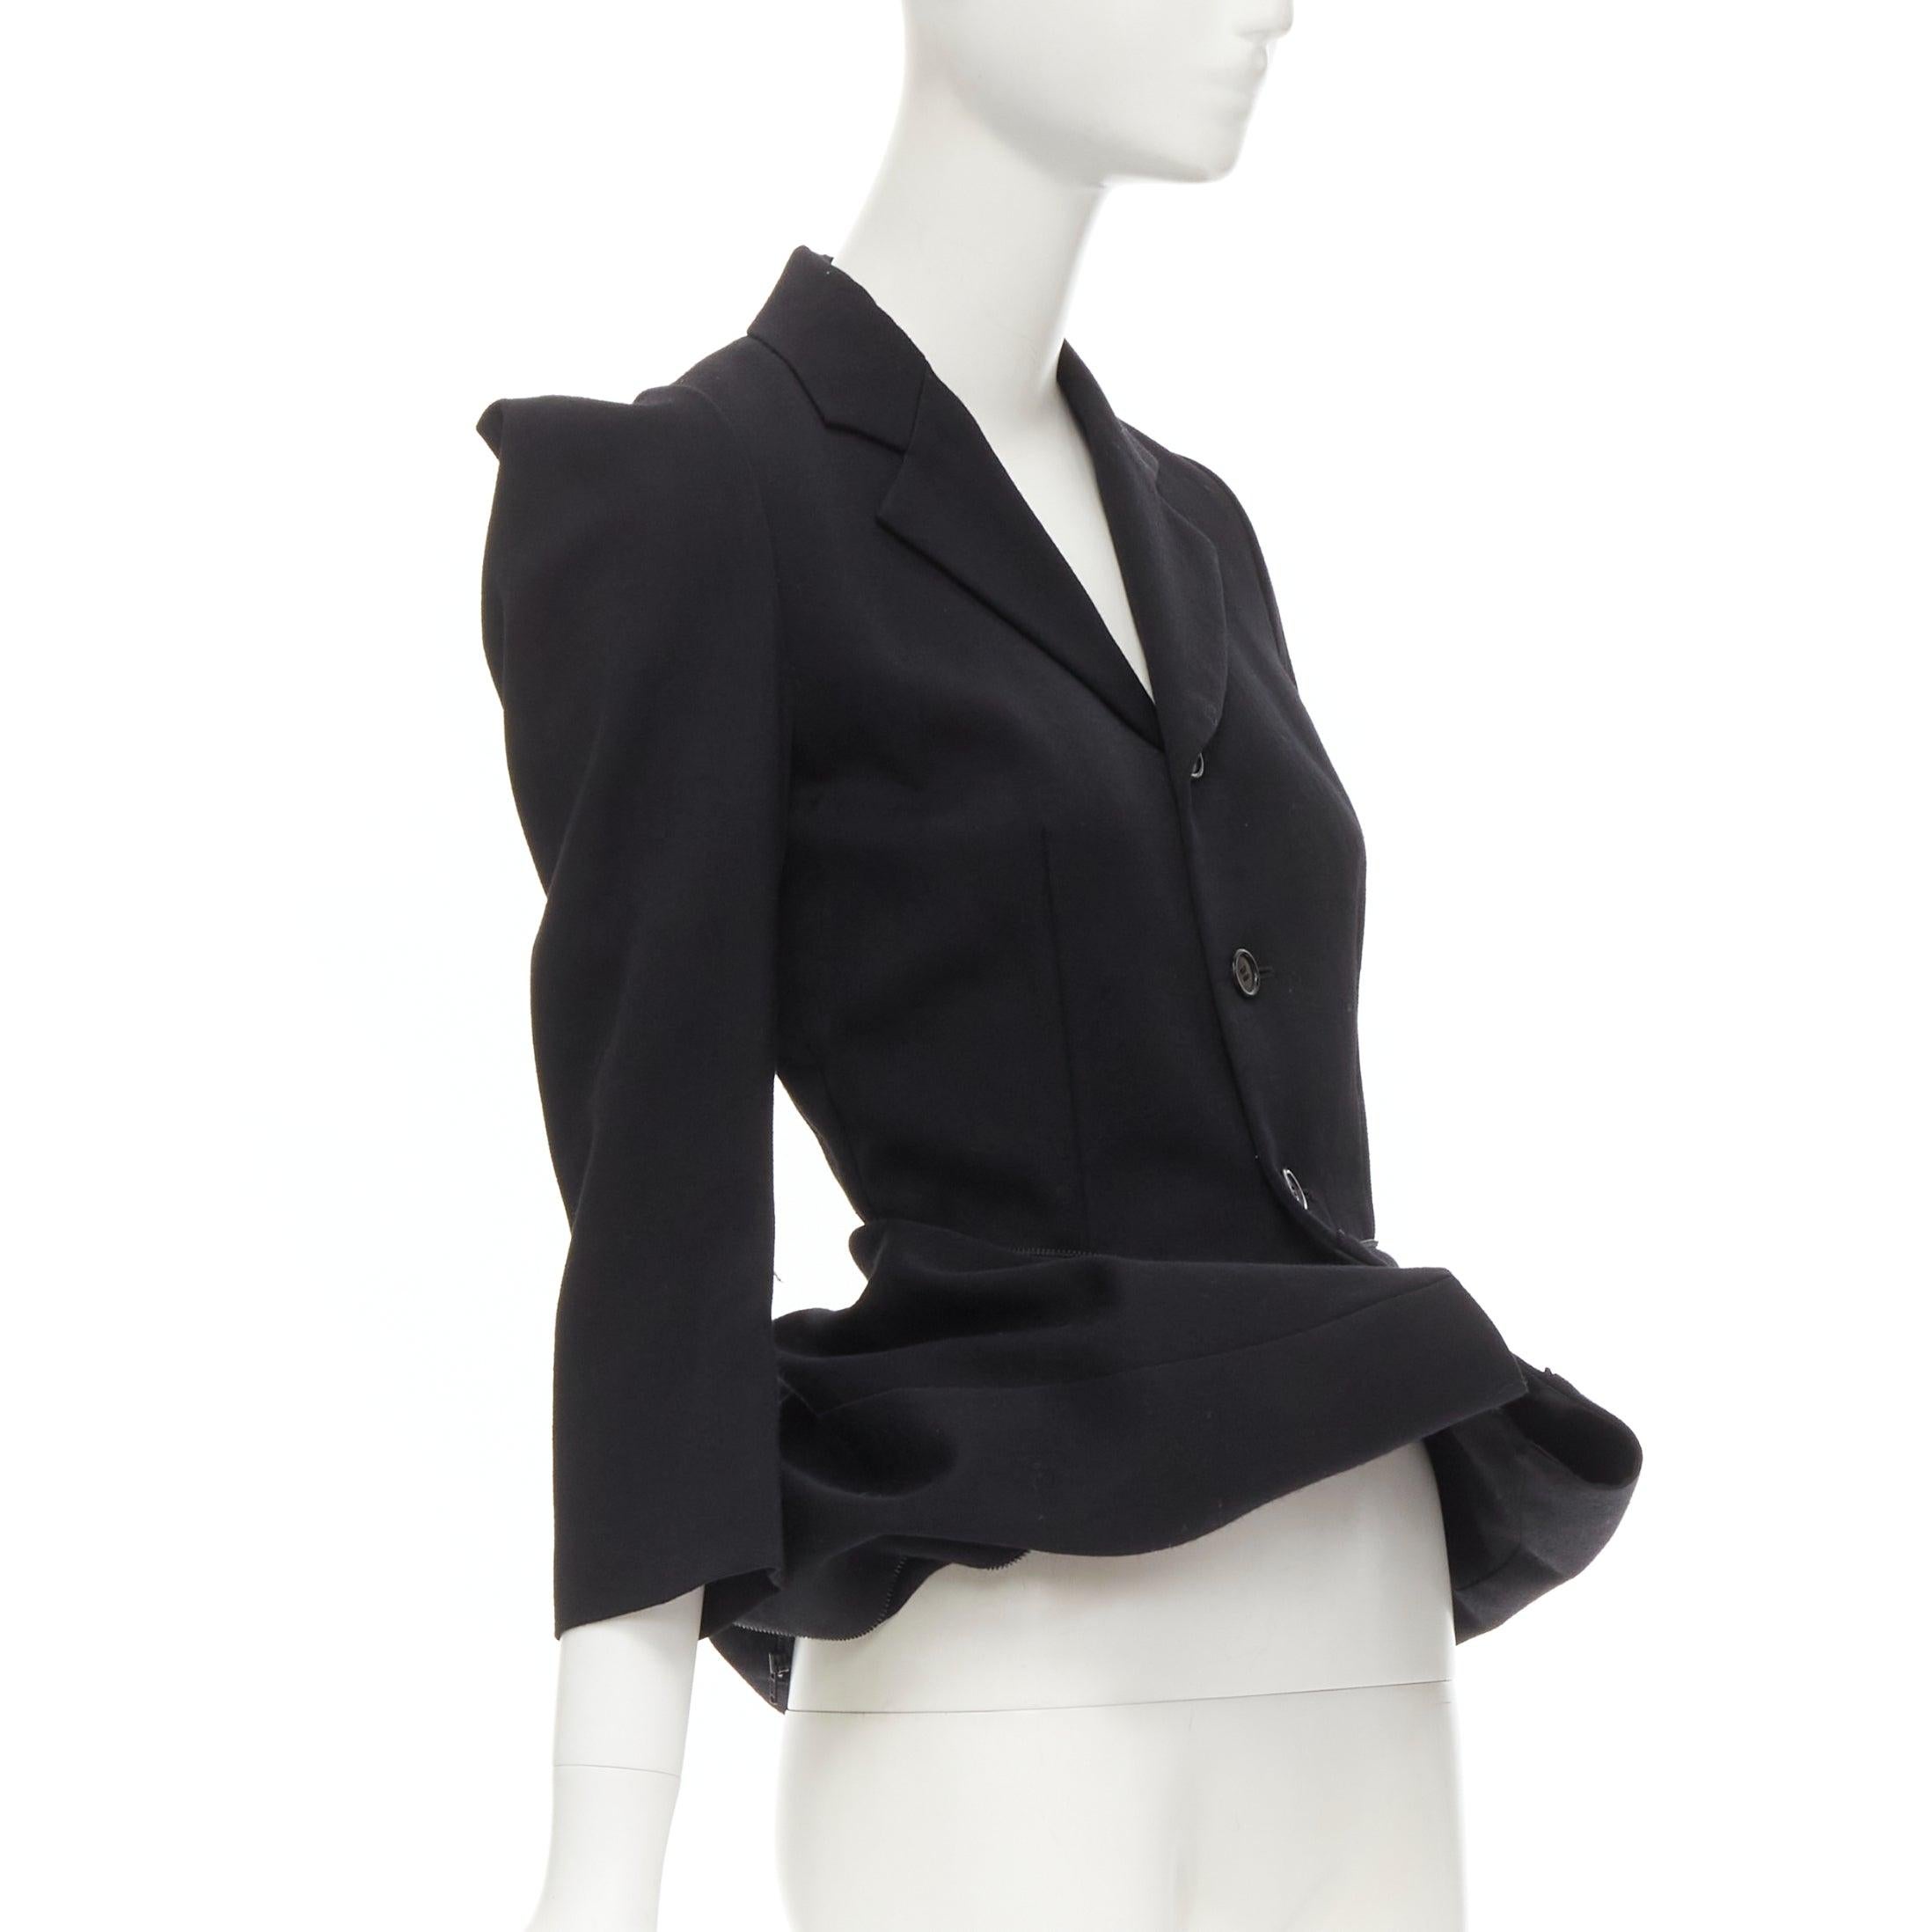 rare JUNYA WATANABE 1999 black wool zip transformable bag peplum blazer S
Reference: CRTI/A00746
Brand: Junya Watanabe
Designer: Junya Watanabe
Collection: 1999 - Runway
Material: Wool
Color: Black
Pattern: Solid
Closure: Button
Lining: Black